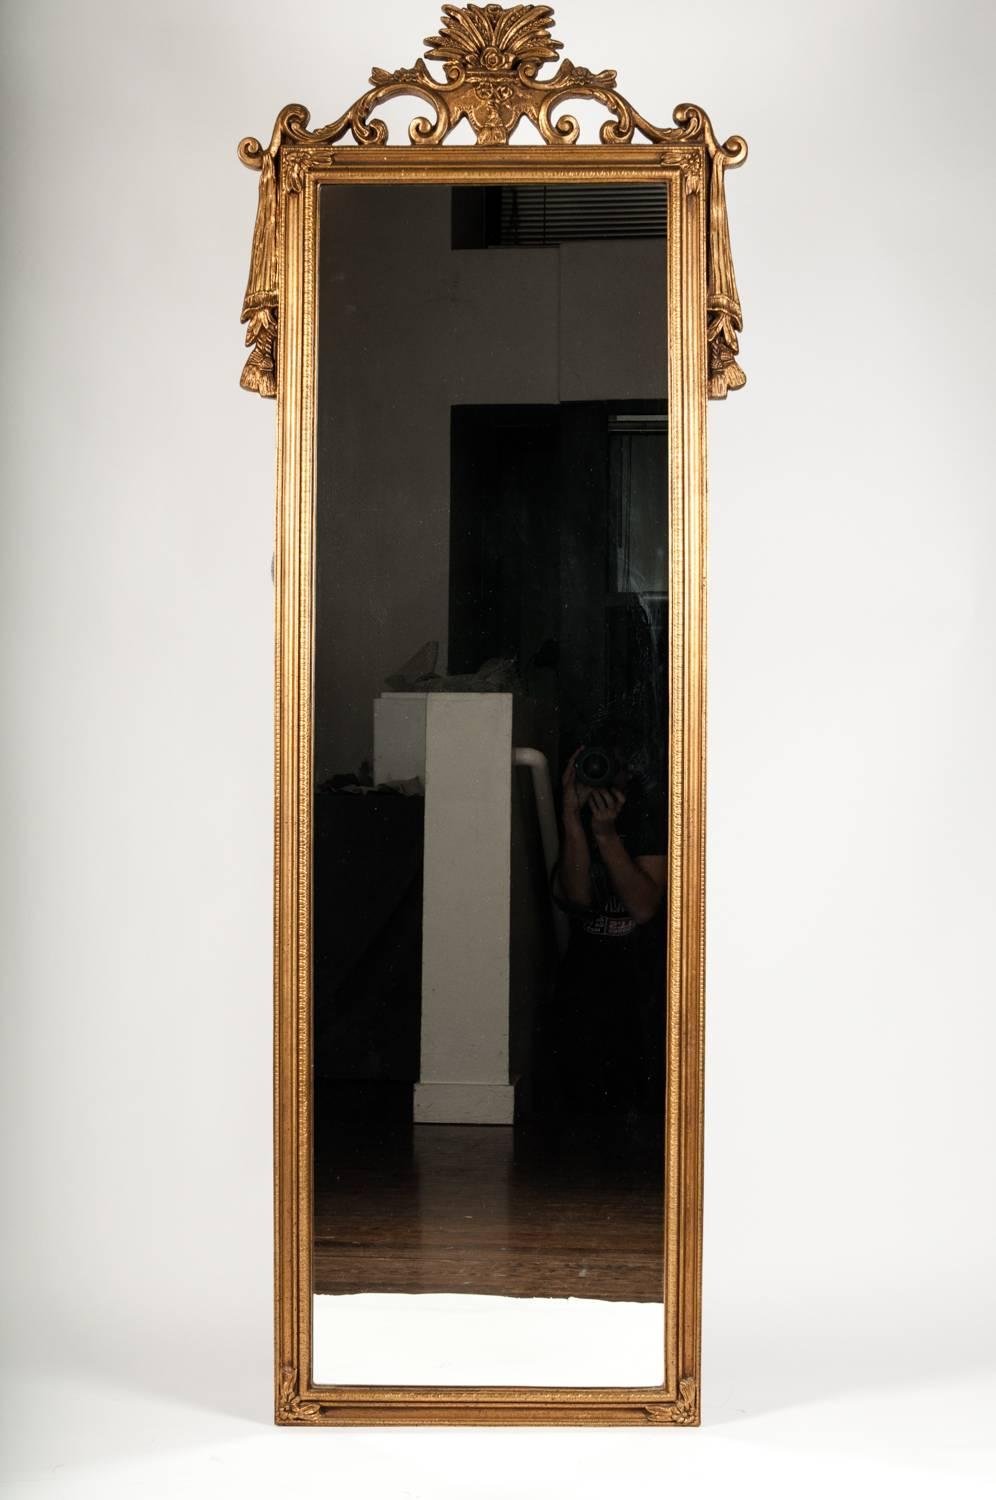 Giltwood Antique Wood Frame Gilt Hanging Wall Mirror